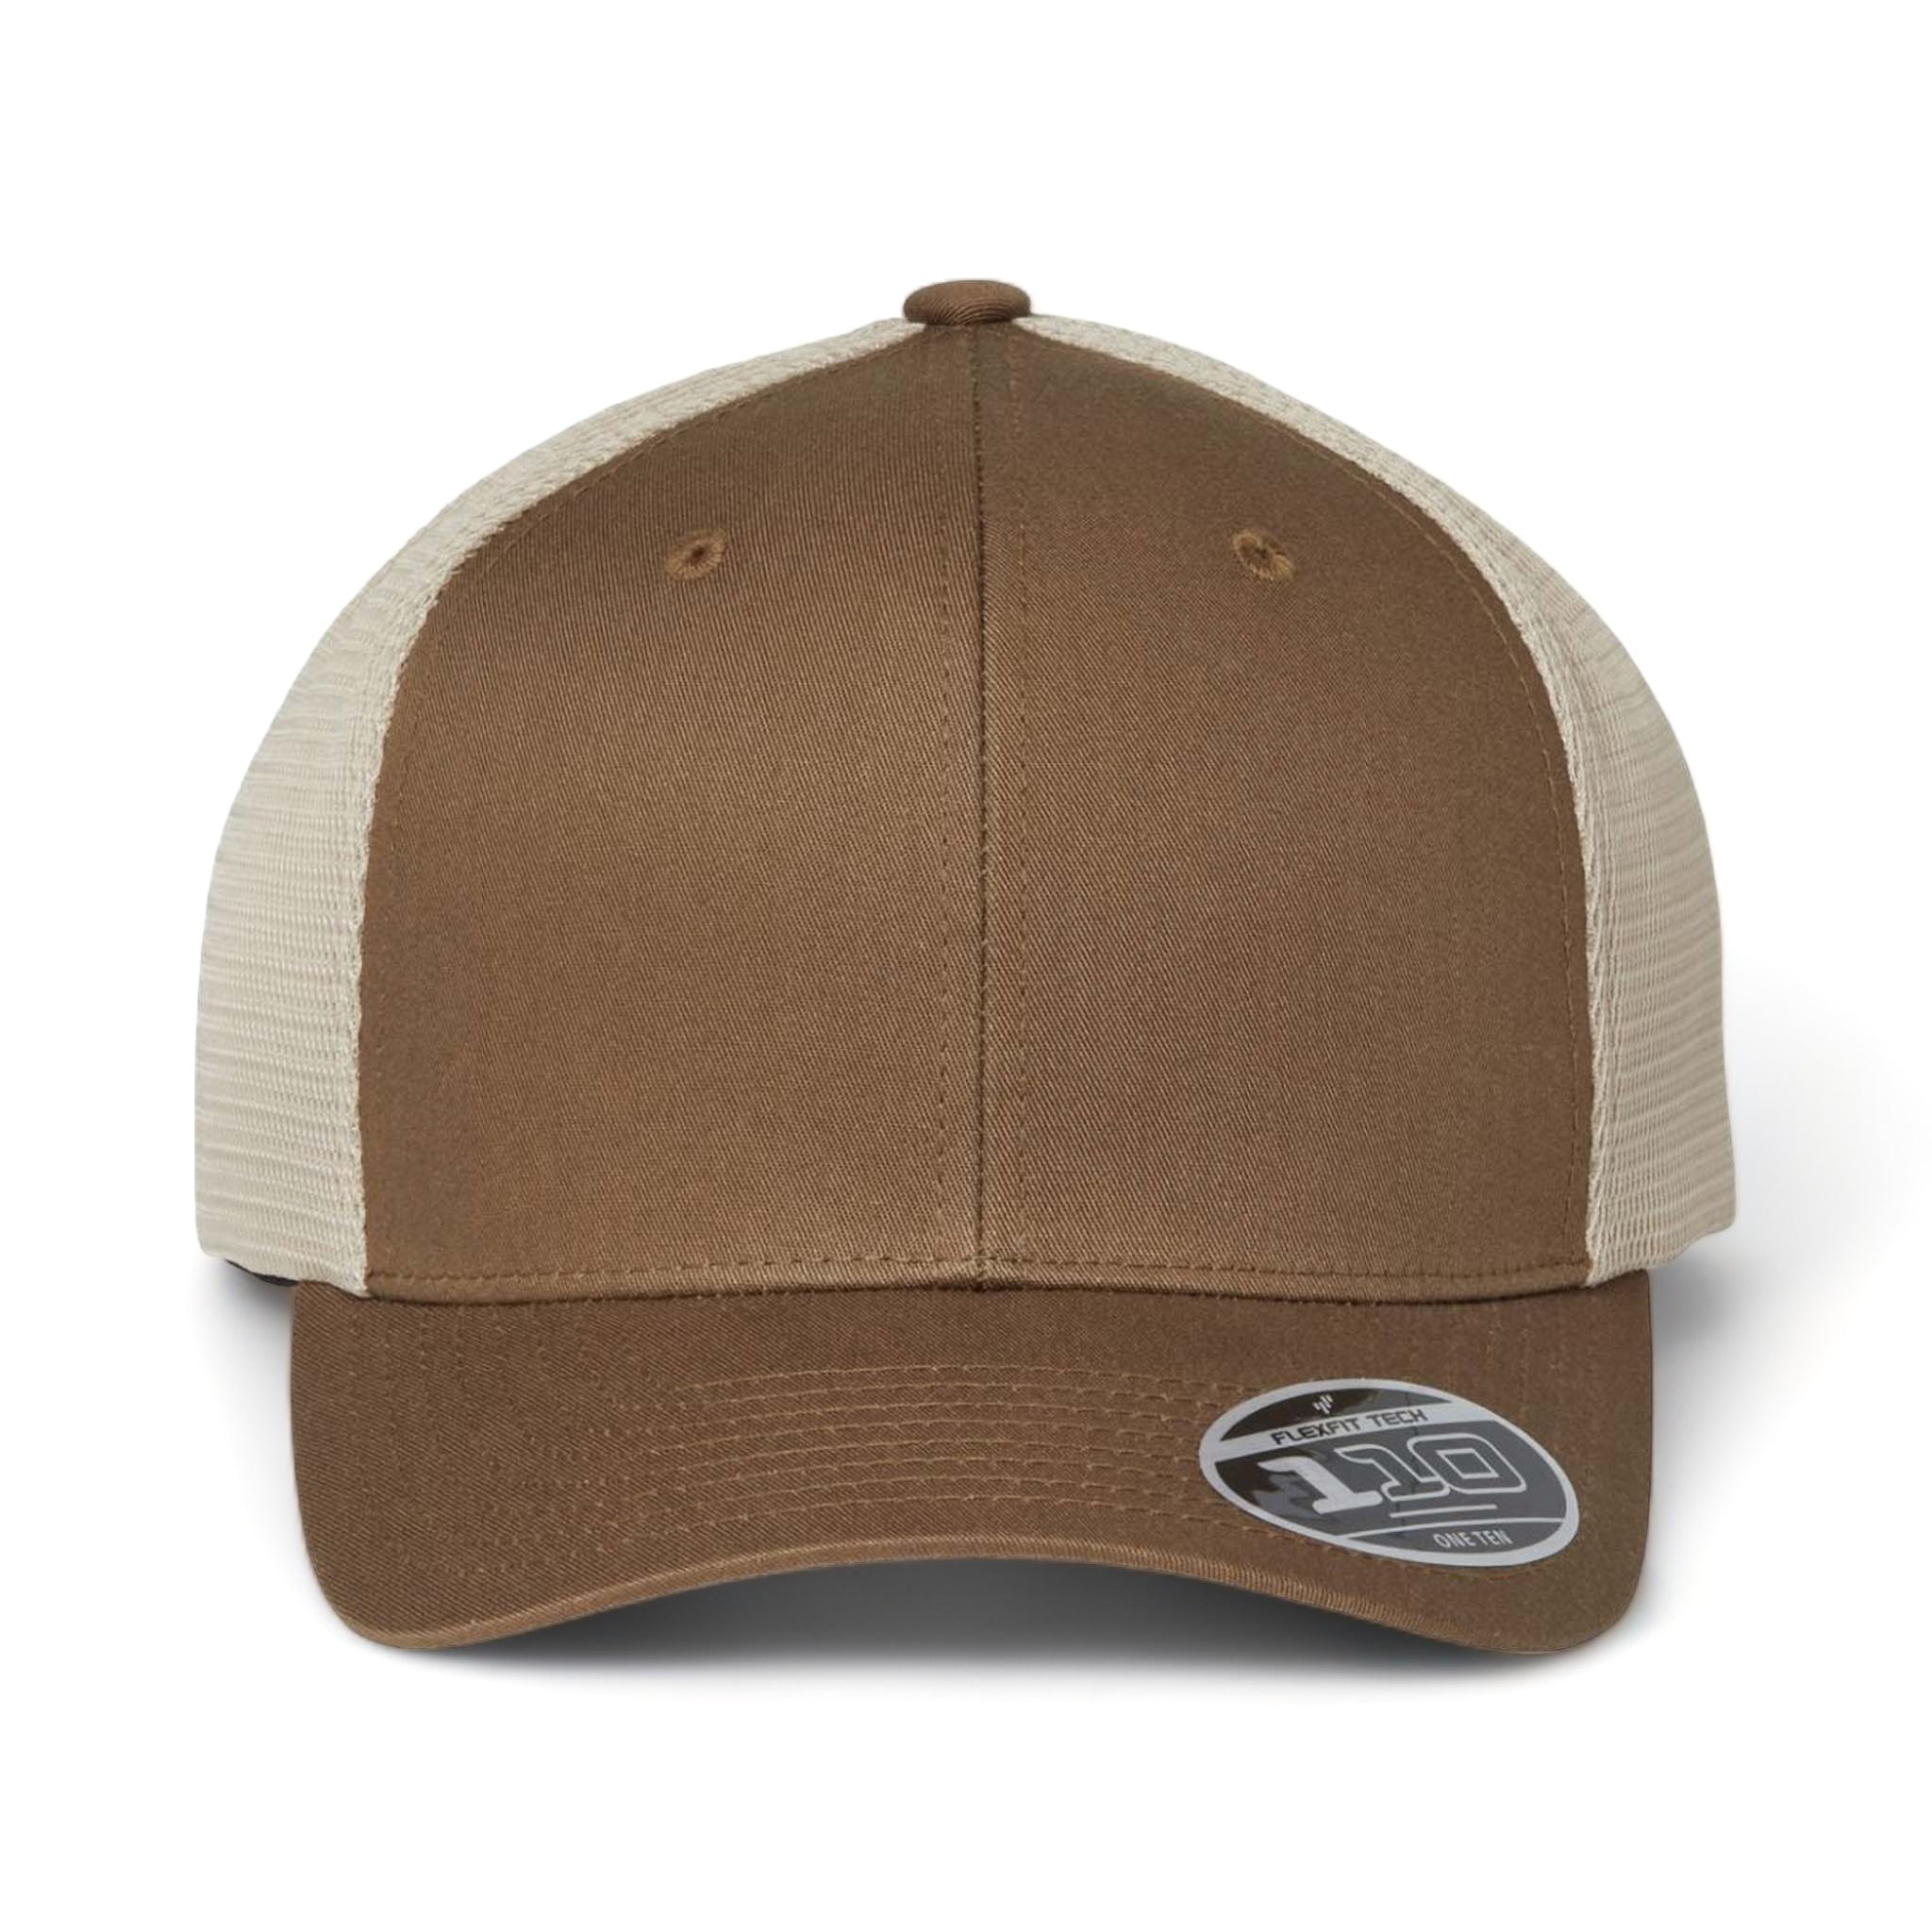 Front view of Flexfit 110M custom hat in coyote brown and khaki